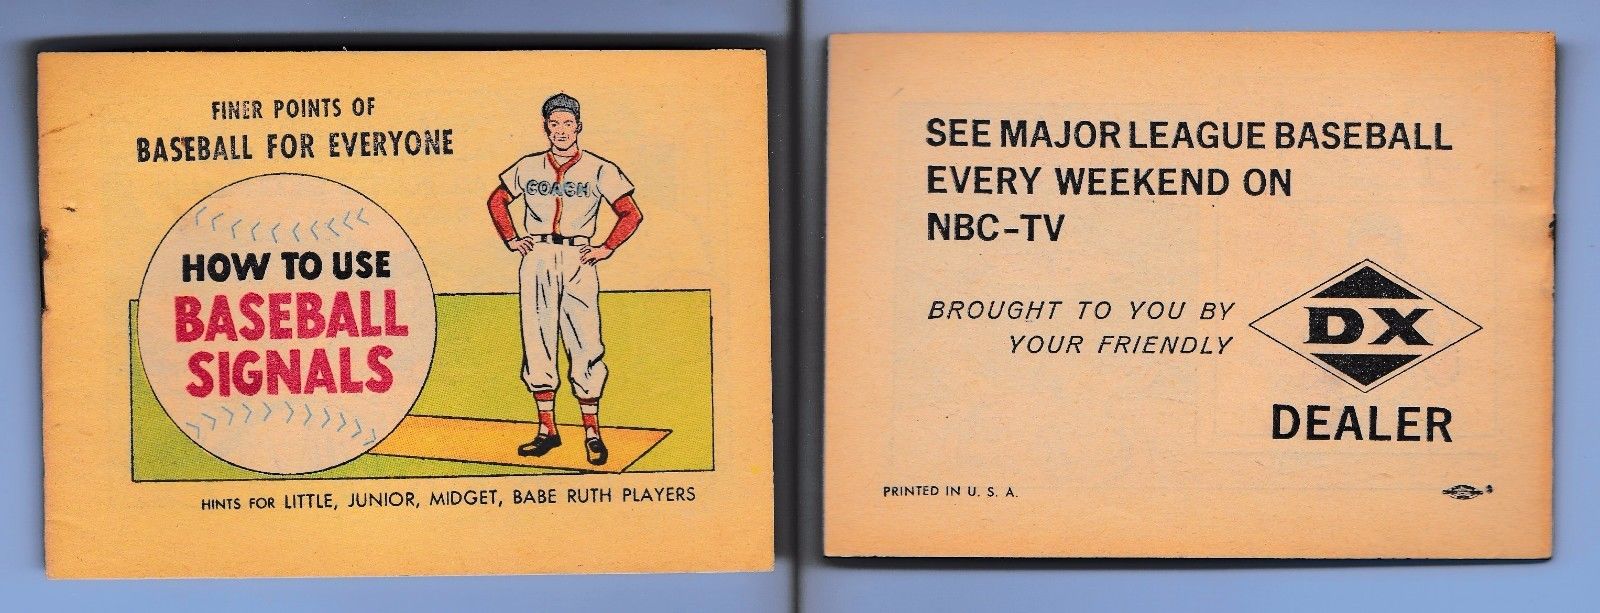  1962 How to Use Baseball Signals - NBC TV/DX Dealer booklet (16 pages) Baseball cards value